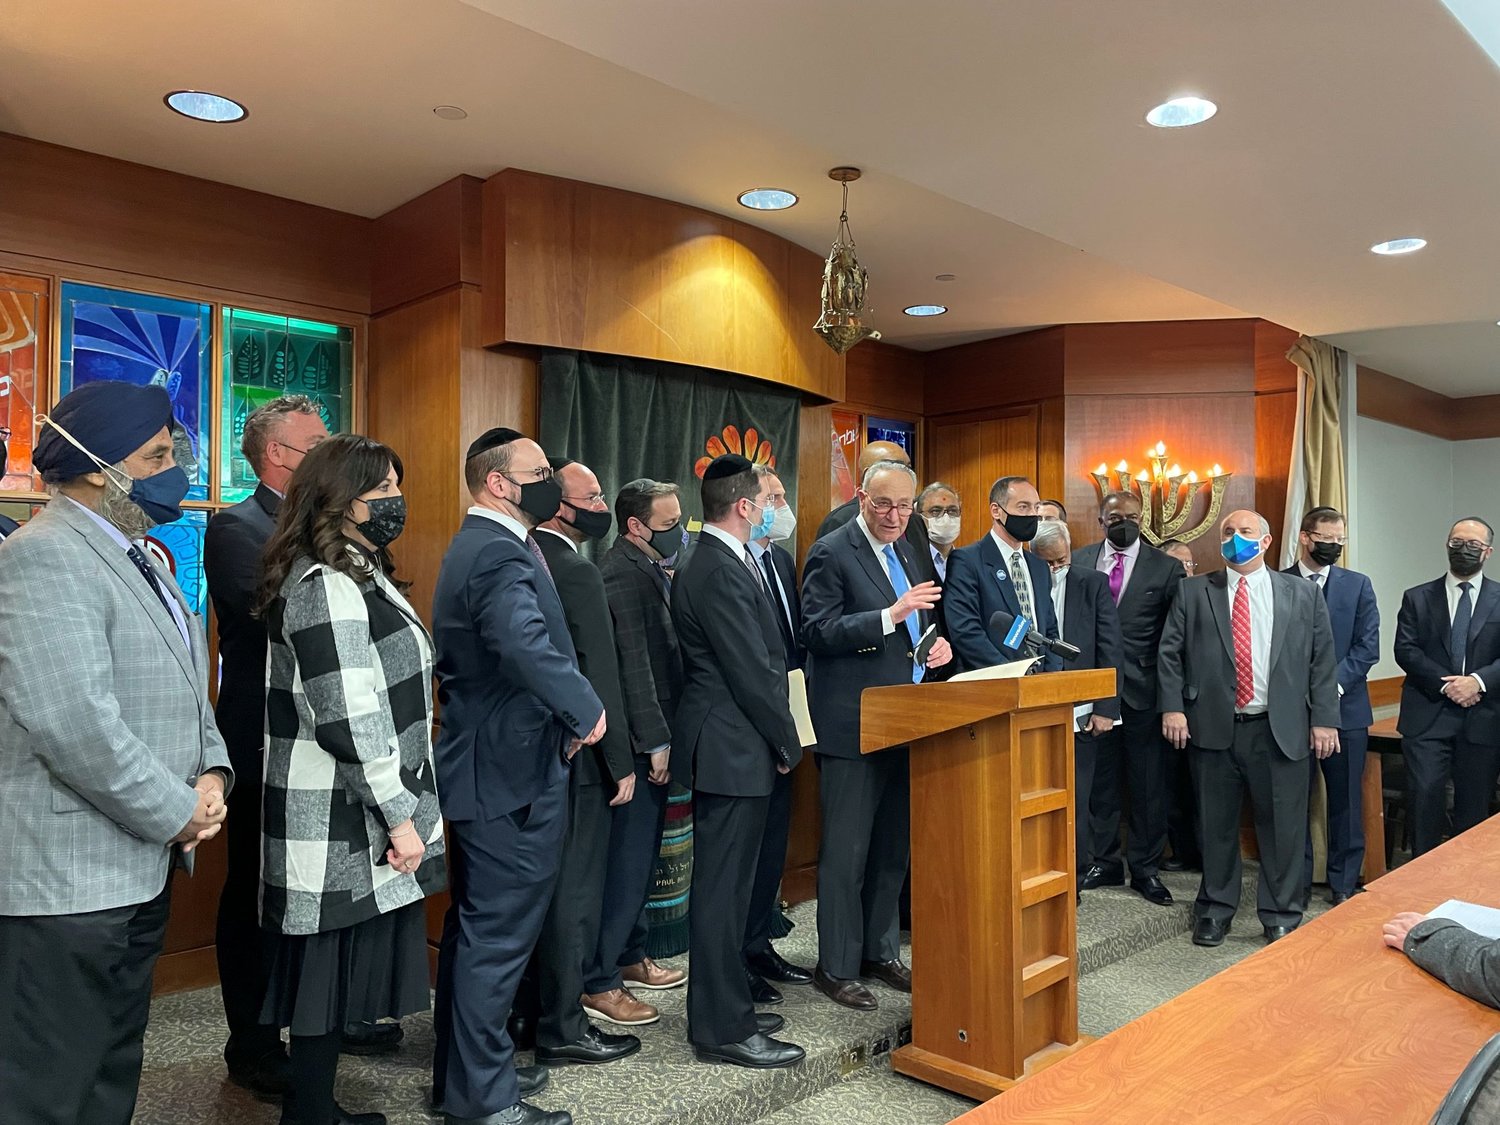 Sen. Charles Schumer, at lectern, surrounded by religious leaders and school administrators, called for doubling the security grant money available for nonprofits.